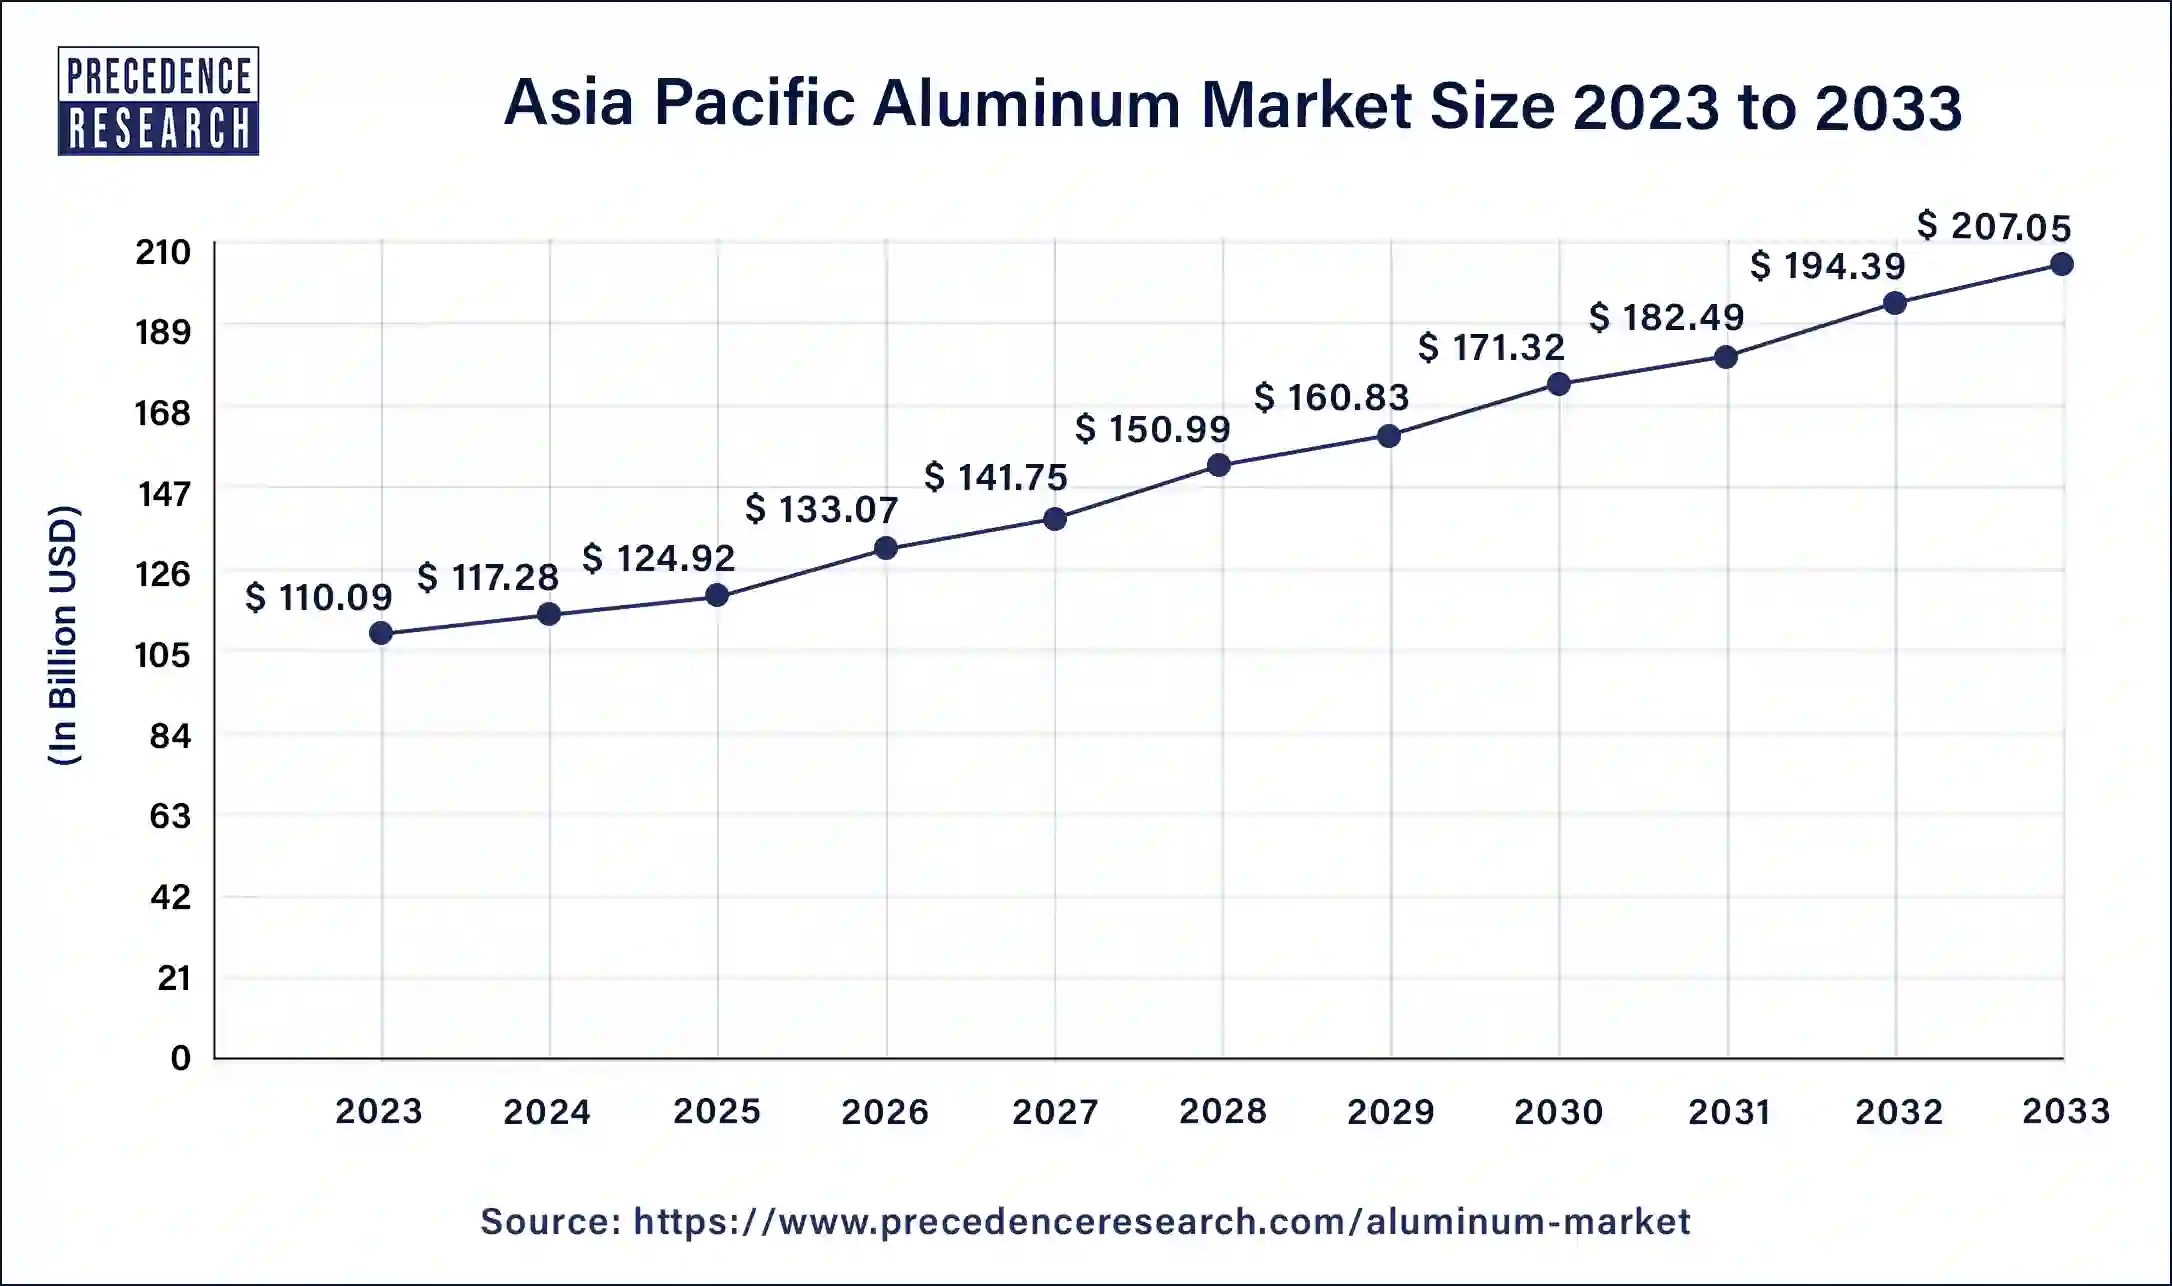 Asia Pacific Aluminum Market Size 2024 to 2033